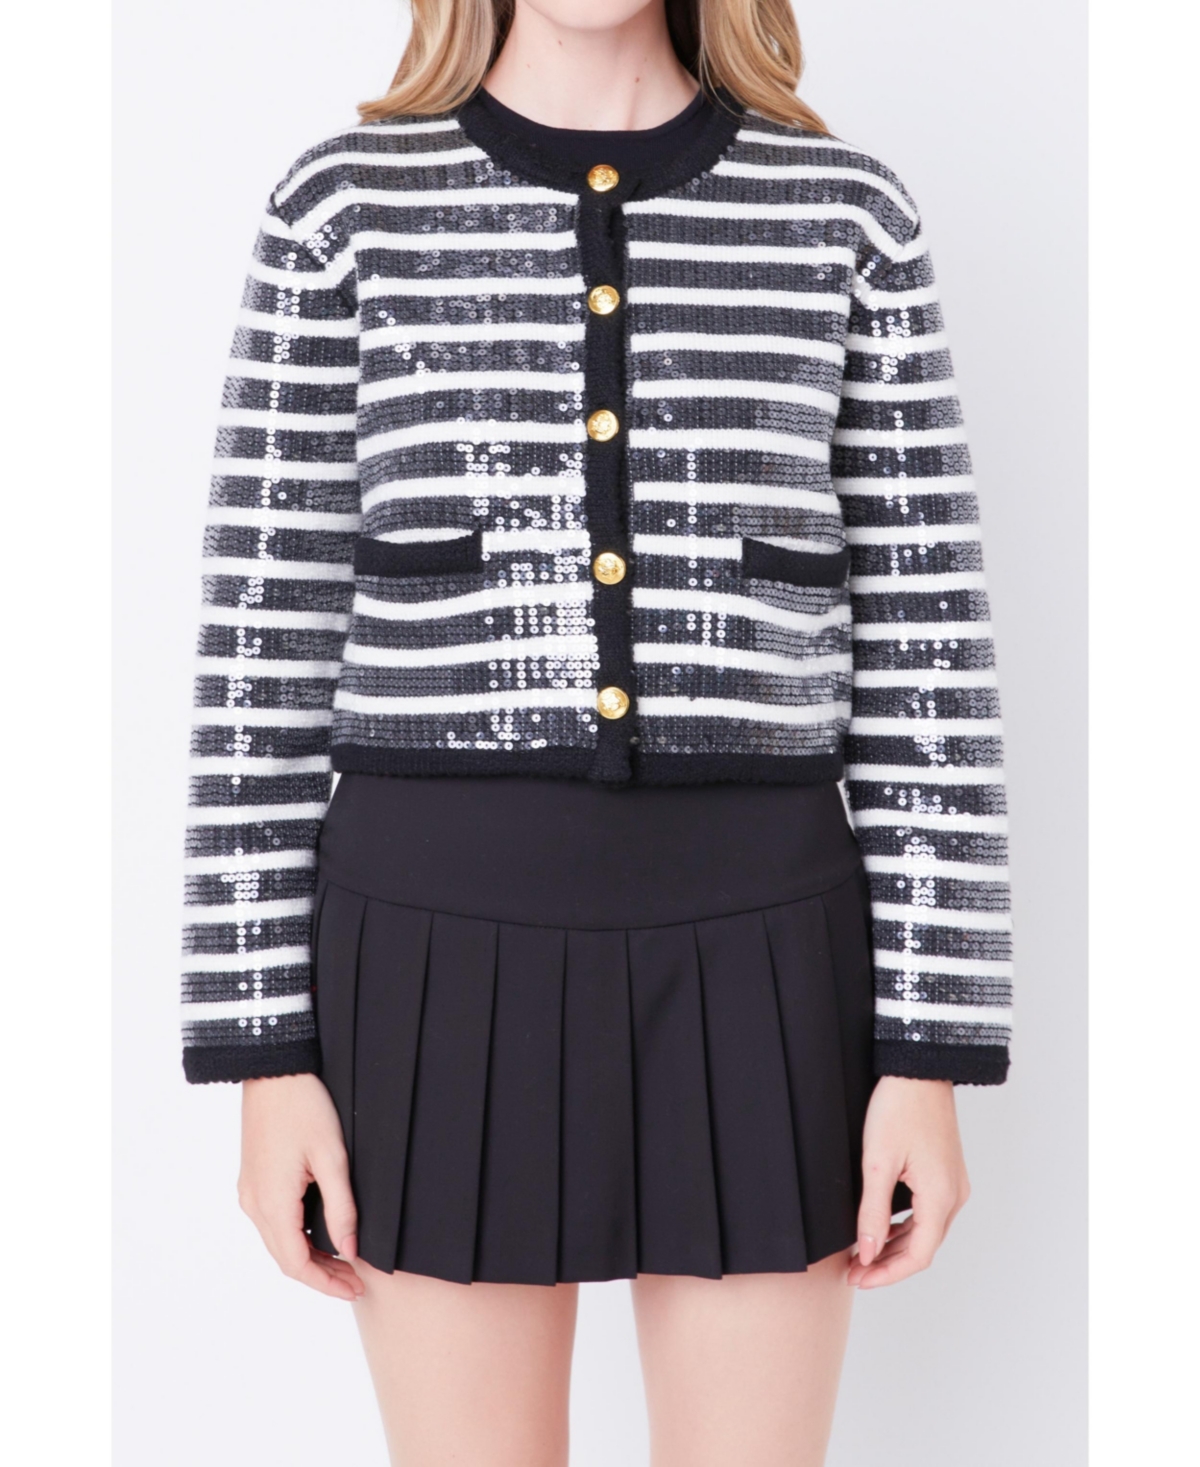 ENGLISH FACTORY WOMEN'S SEQUIN STRIPED KNIT CARDIGAN